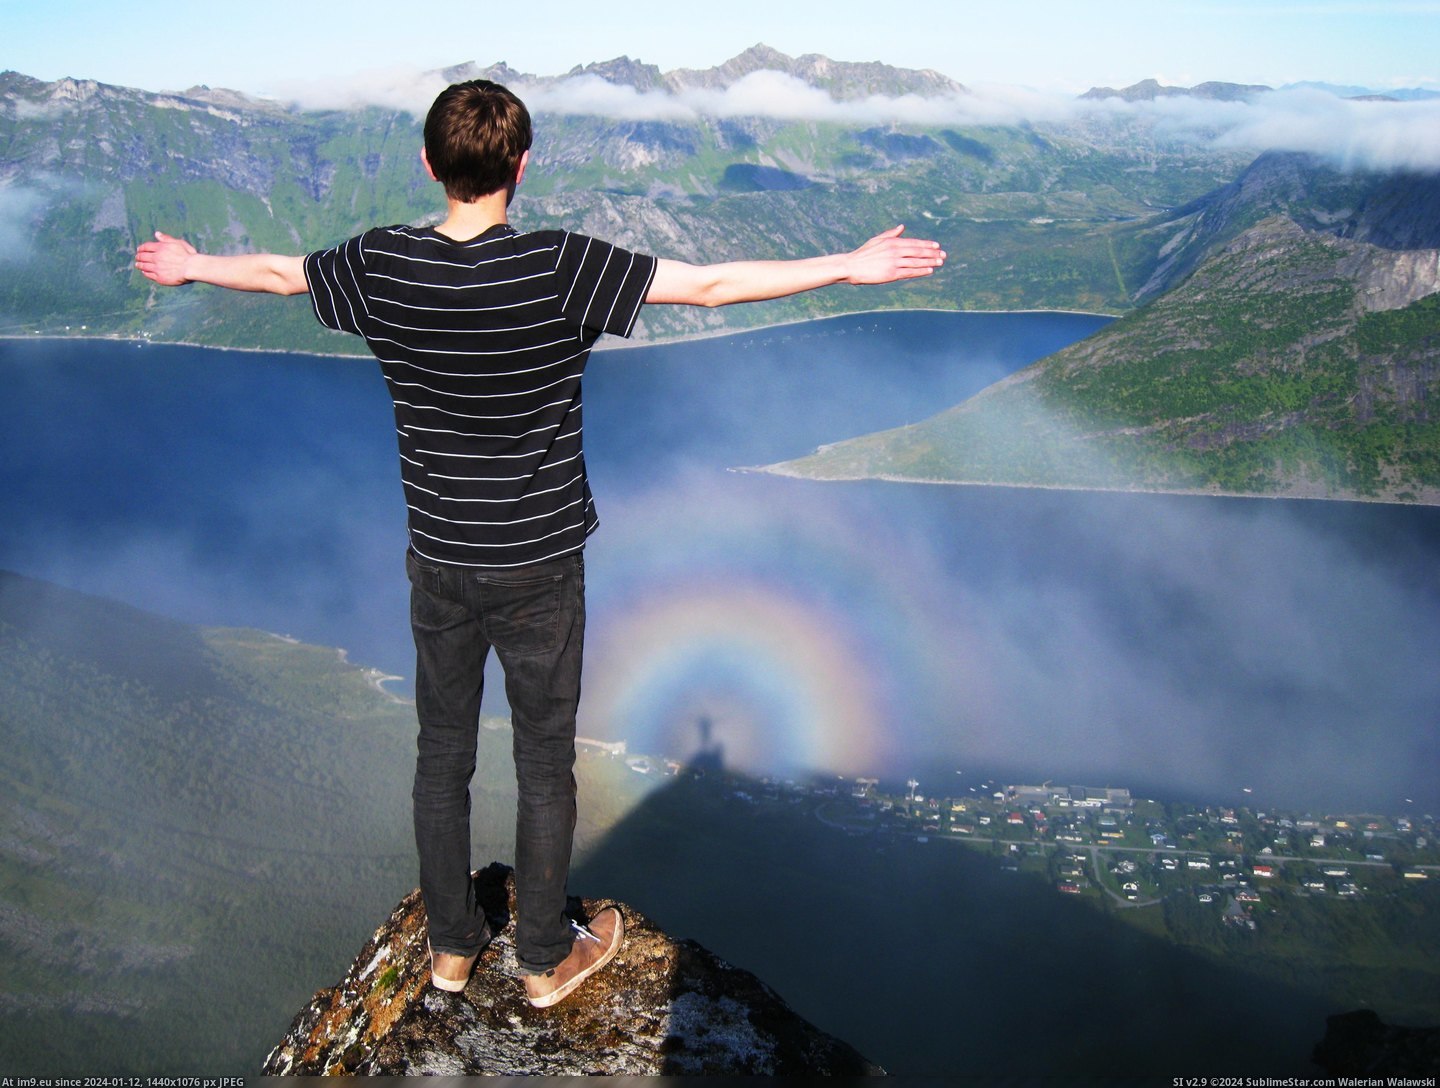 #Year #Beautiful #Top #Mountain #Unique #Degree #Segla #Shado #Moment #Norway #Northern #Rainbow [Pics] Unique moment from last year. Me on top of the mountain Segla, Northern Norway. 360 degree rainbow with a beautiful shado Pic. (Image of album My r/PICS favs))